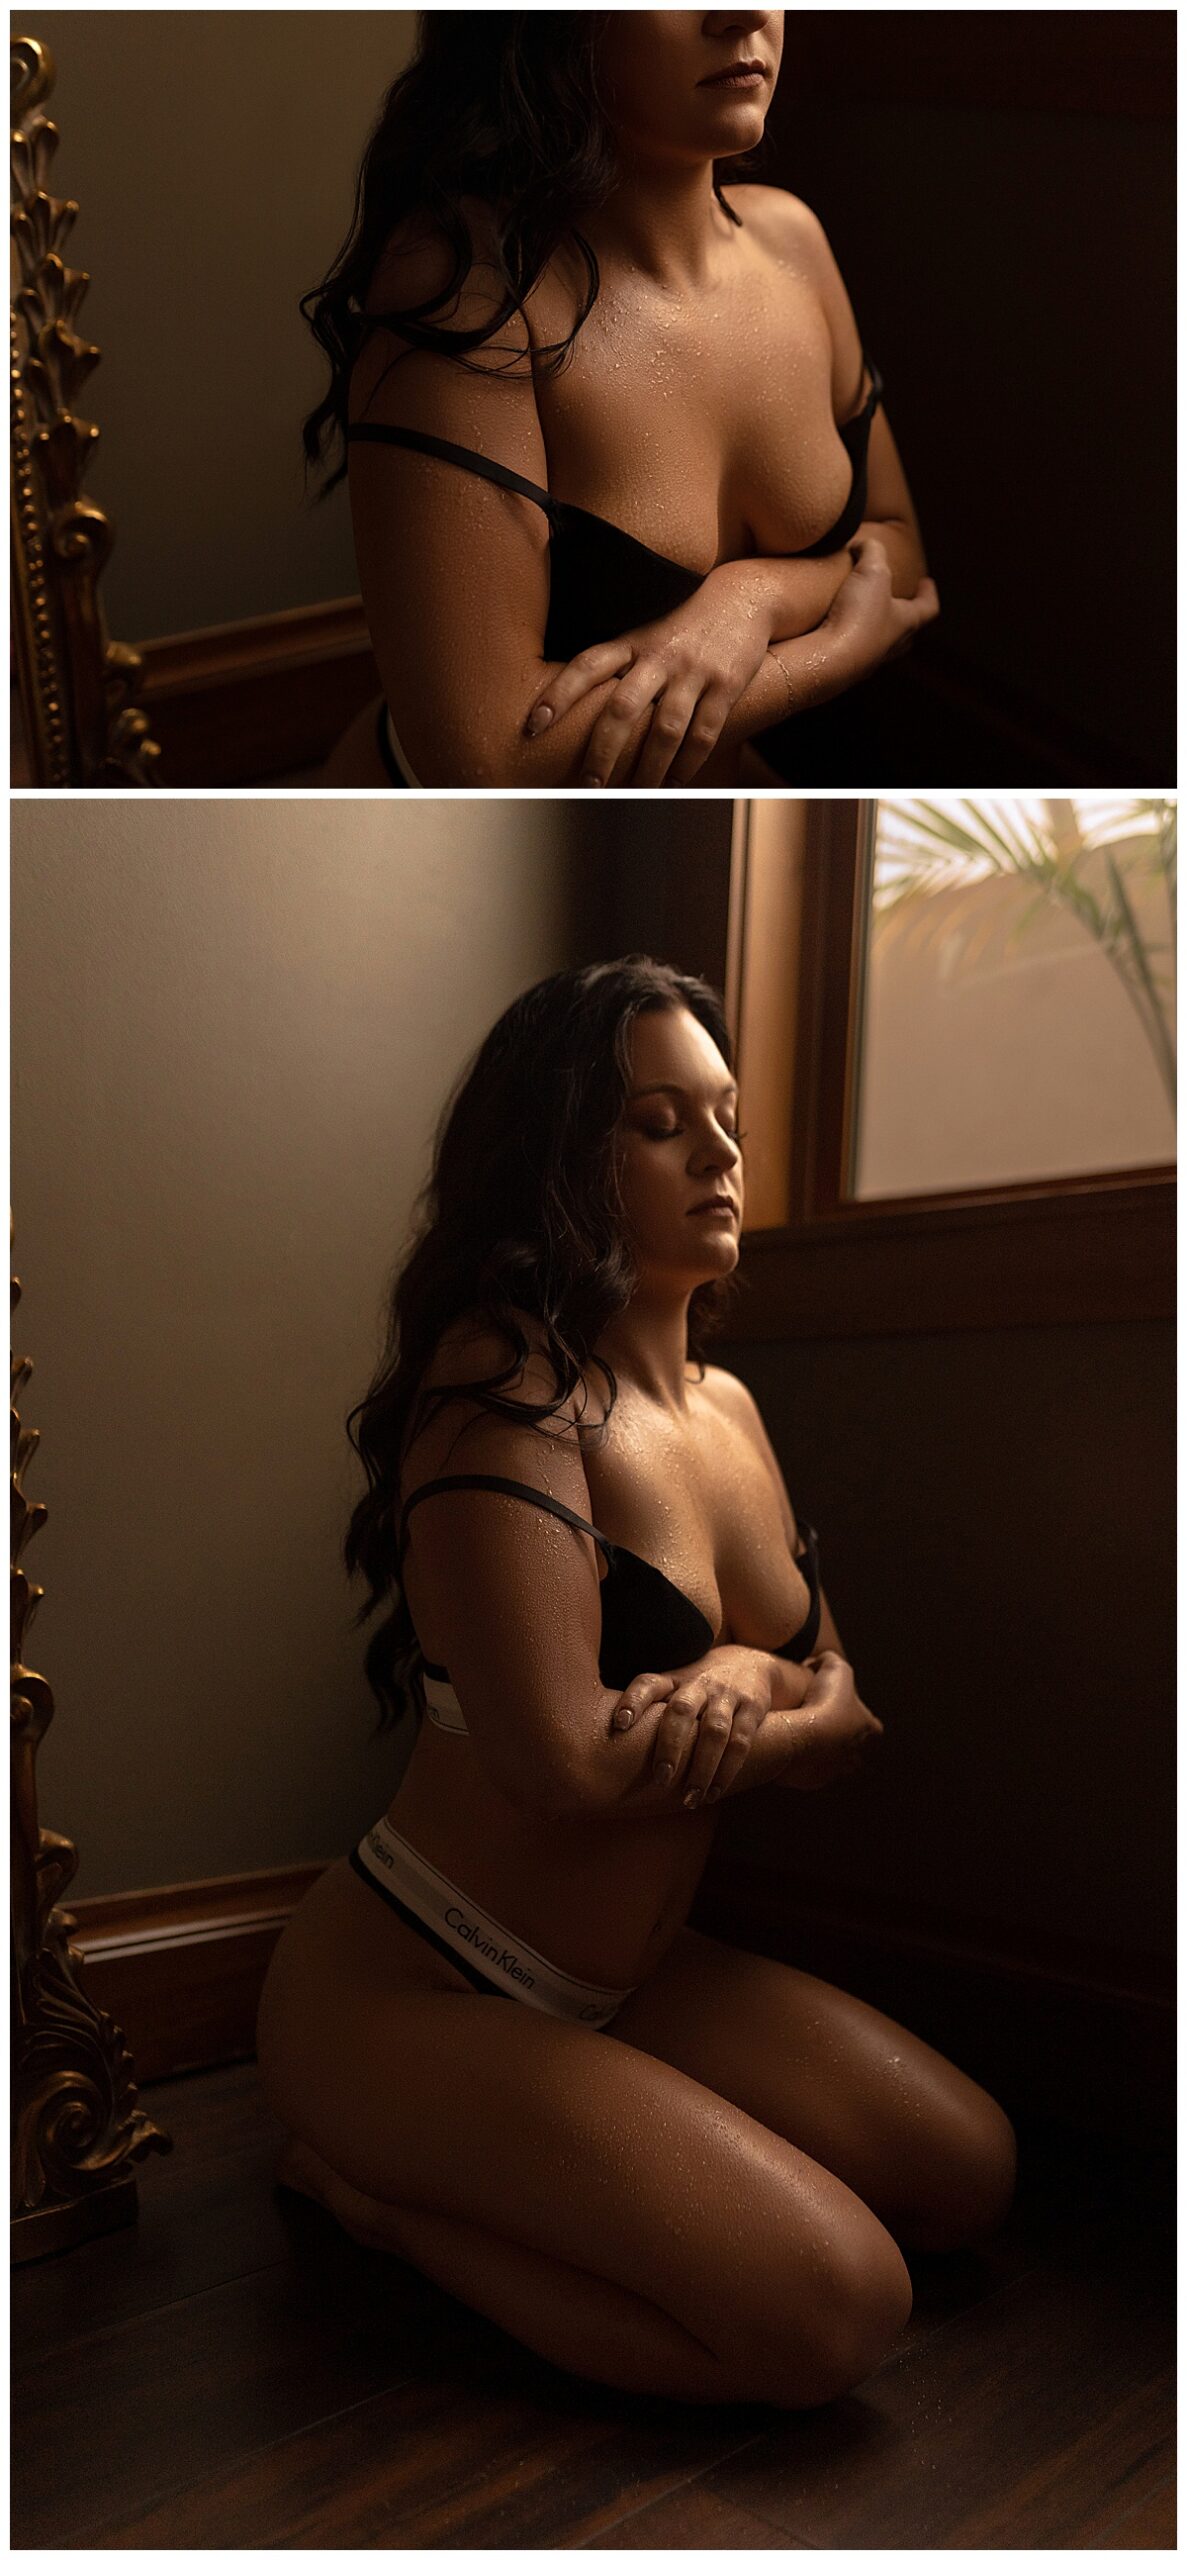 Girl covers her body with her arms crossed for Sioux Falls Boudoir Photographer